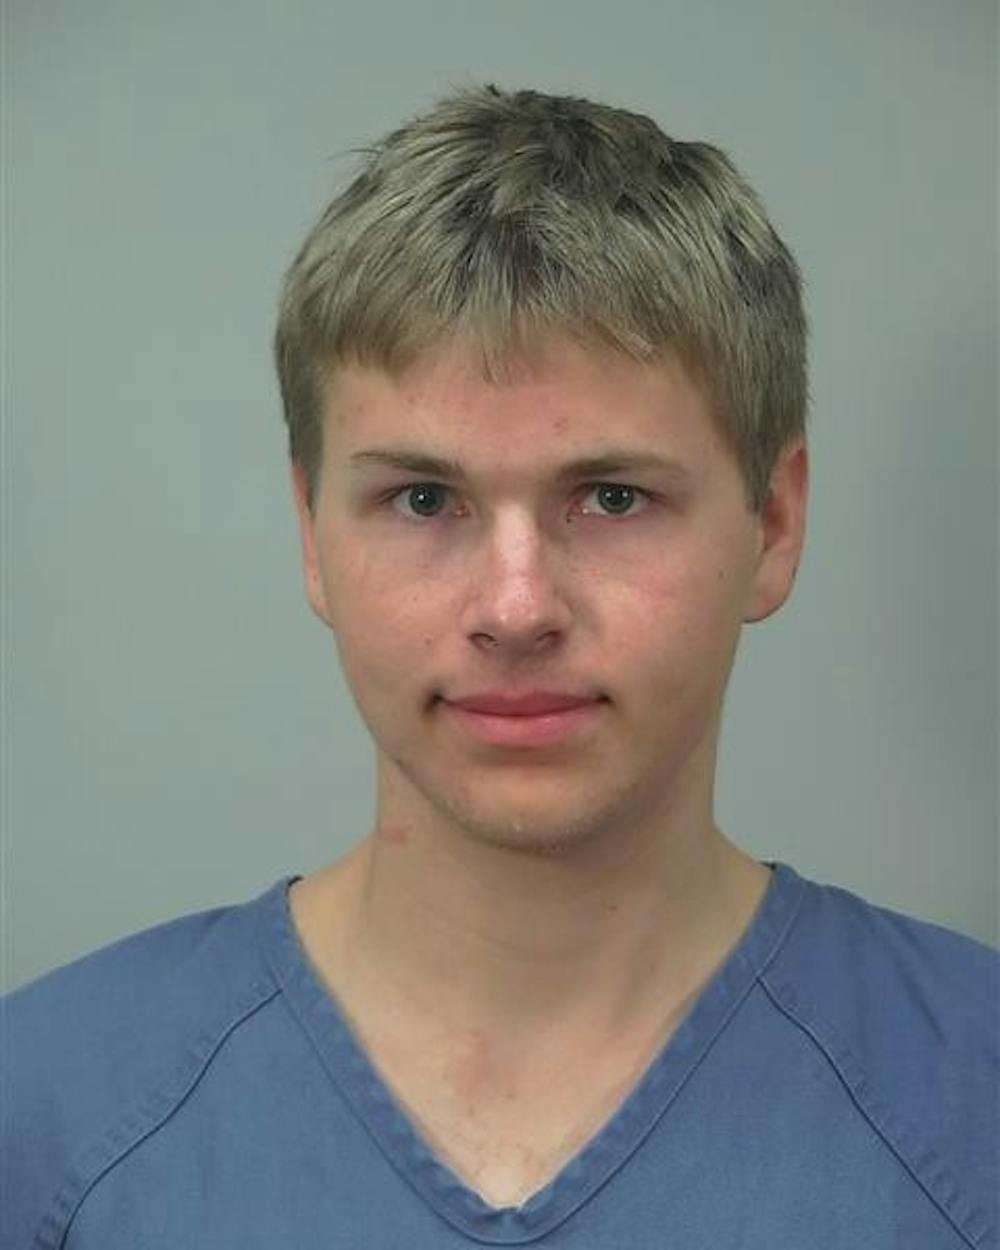 UW-Madison student Alec Shiva was booked in the Dane County Jail Thursday for second-degree sexual assault and other charges that reportedly occurred in a UW-Madison residence hall.